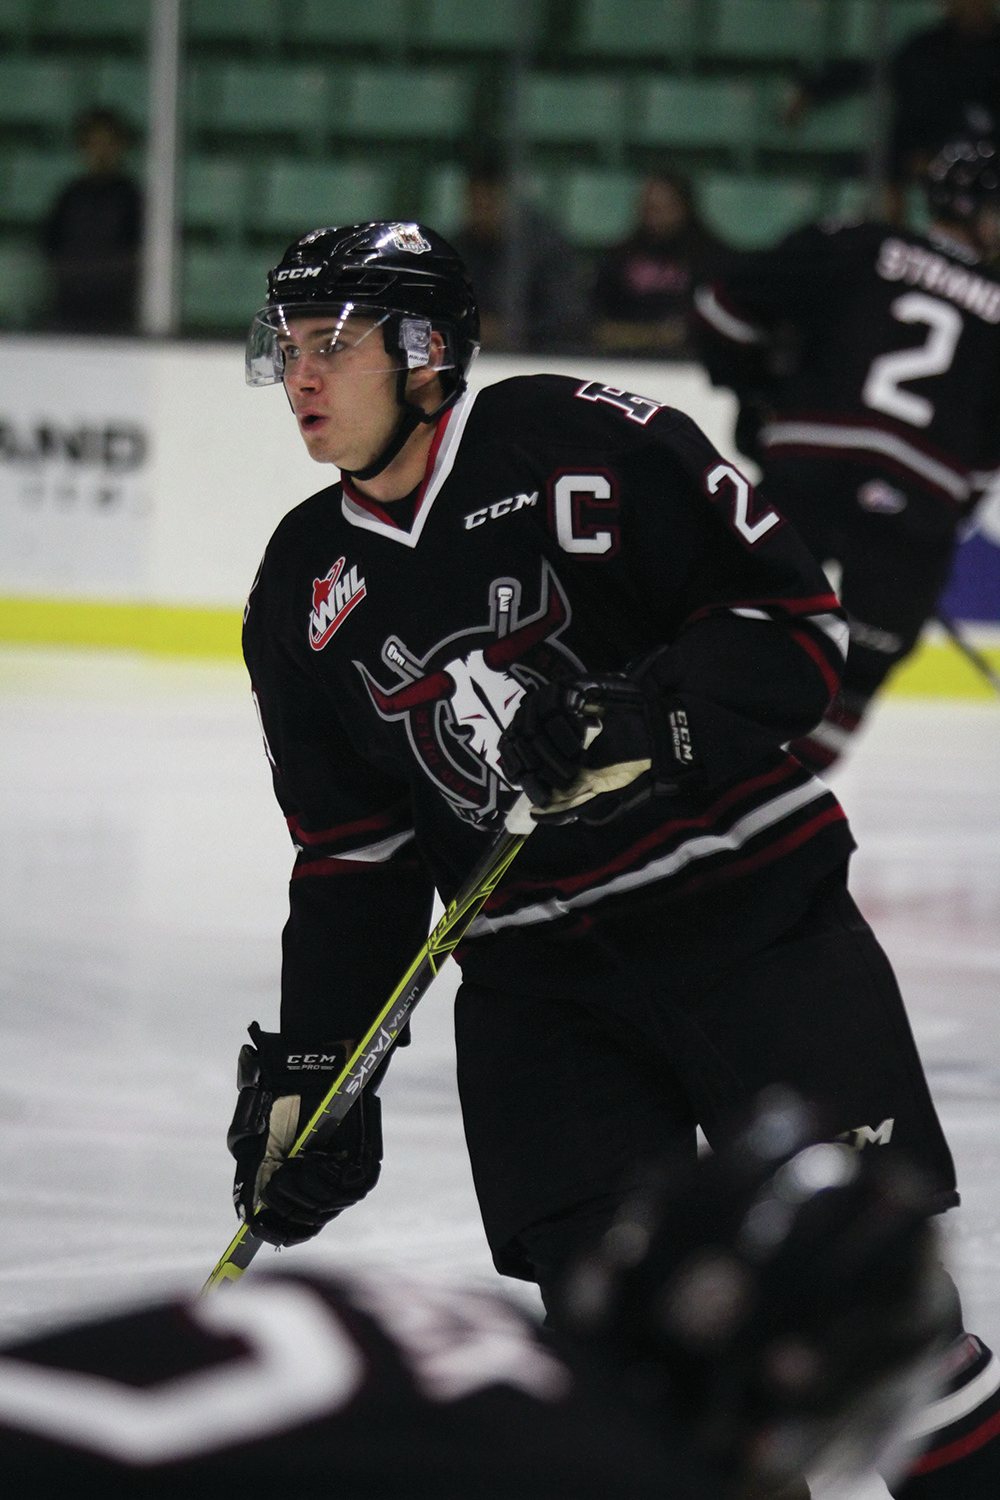 EL CAPITAN - Wyatt Johnson was named the new captain of the Red Deer Rebels last month. Johnson has been a steady presence in the Rebels’ line-up for the past four years.